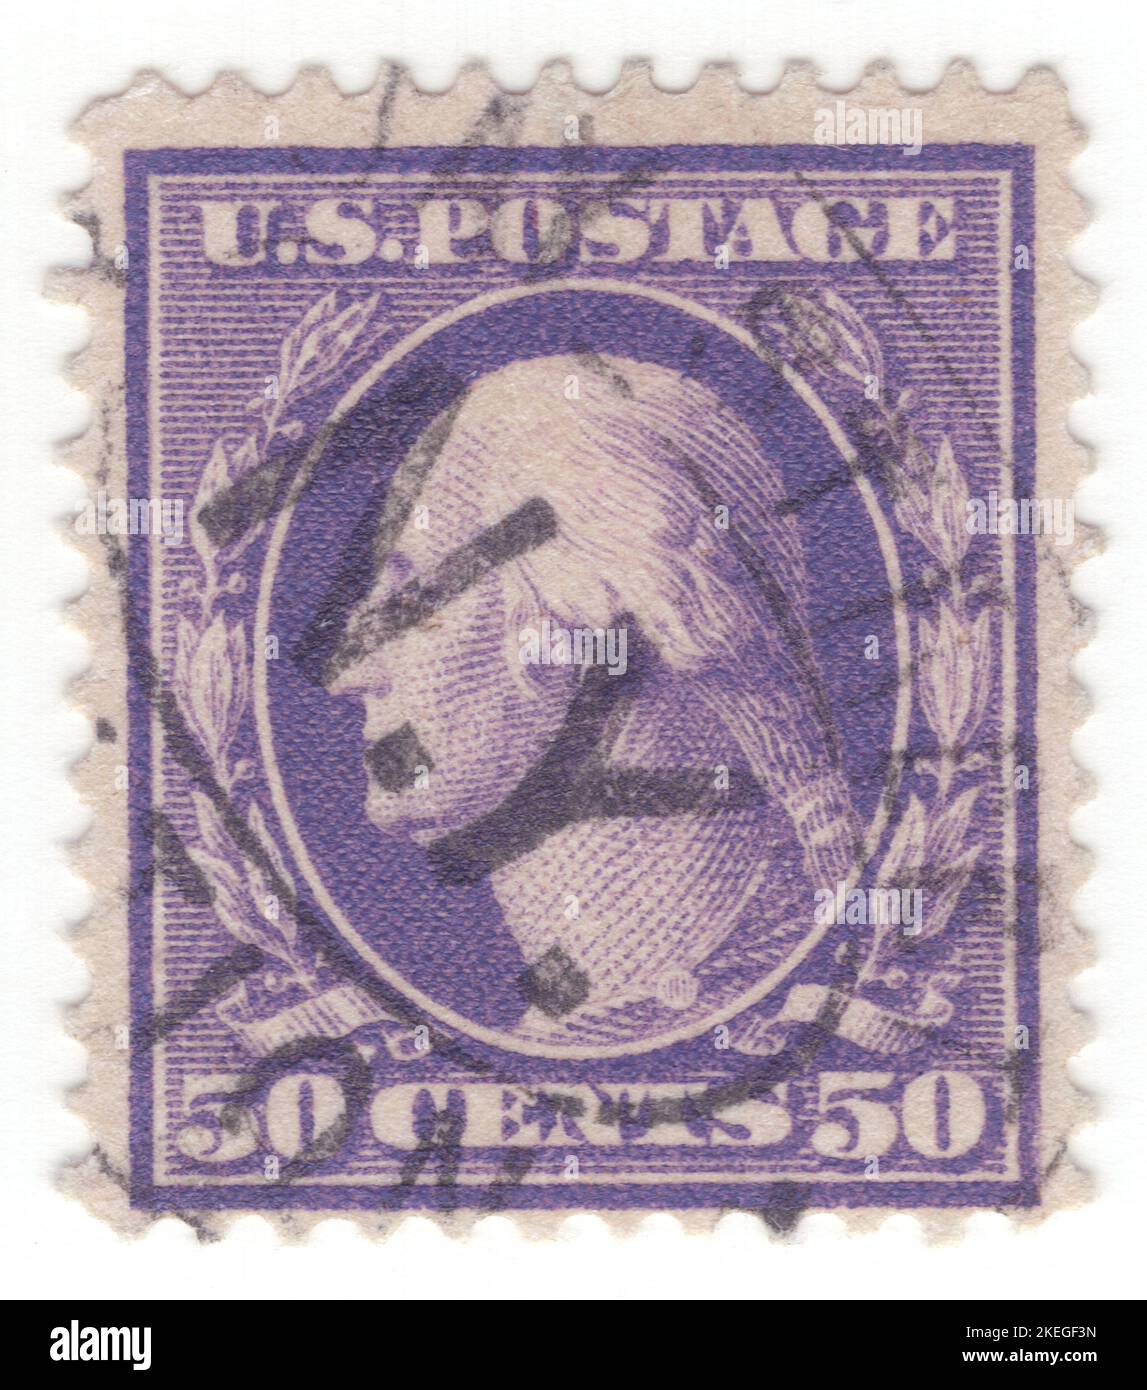 USA - 1909: An 50 cents violet postage stamp depicting portrait of George Washington. American military officer, statesman, and Founding Father who served as the first president of the United States from 1789 to 1797. Appointed by the Continental Congress as commander of the Continental Army, Washington led the Patriot forces to victory in the American Revolutionary War and served as the president of the Constitutional Convention of 1787, which created the Constitution of the United States and the American federal government. Washington has been called the 'Father of his Country' Stock Photo